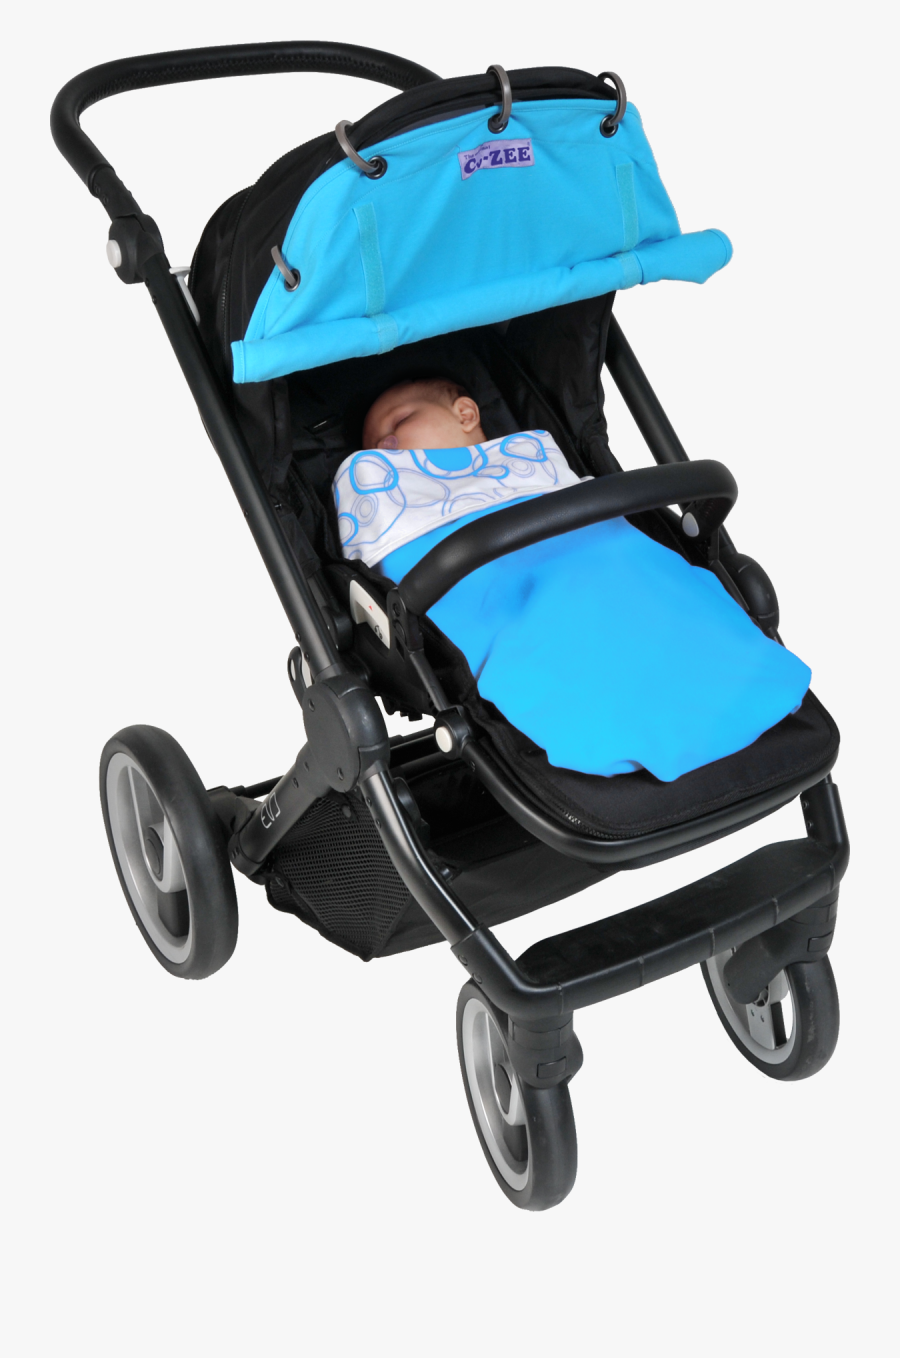 Baby In Stroller Png, Transparent Clipart